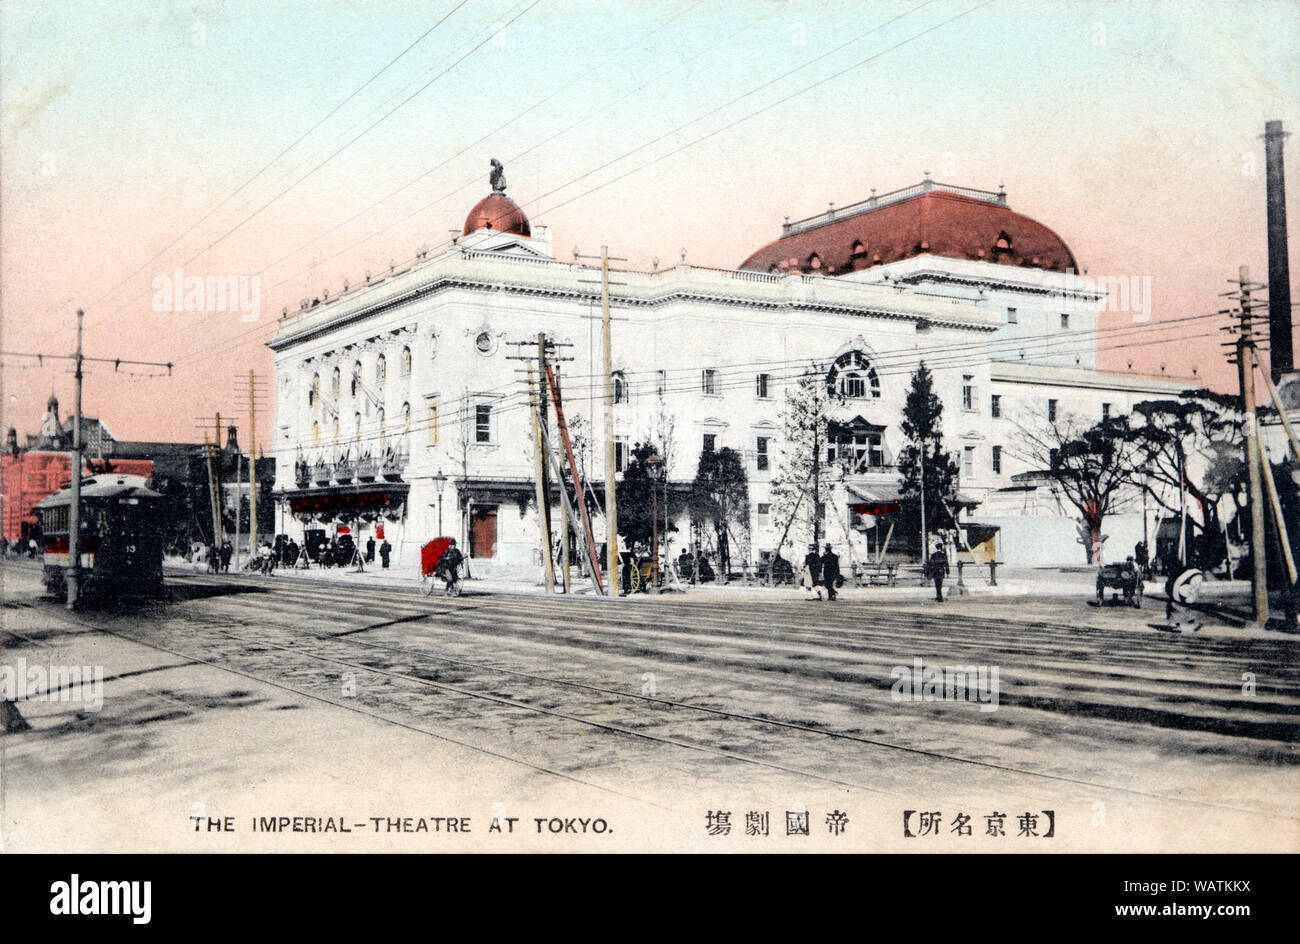 [ 1910s Japan - Imperial Theater in Tokyo ] —   The Teikoku Gekijo Kaisha (Imperial Theatre Company) in Marunouchi, Tokyo.   I was completed in 1911. The theater was Japan's first Western-style theater staging the country's first non-Japanese theater programs.  It was devastated by the Kanto Earthquake of 1923. After a complete rebuilding, it was reopened in 1924. The building was replaced in 1966.  20th century vintage postcard. Stock Photo